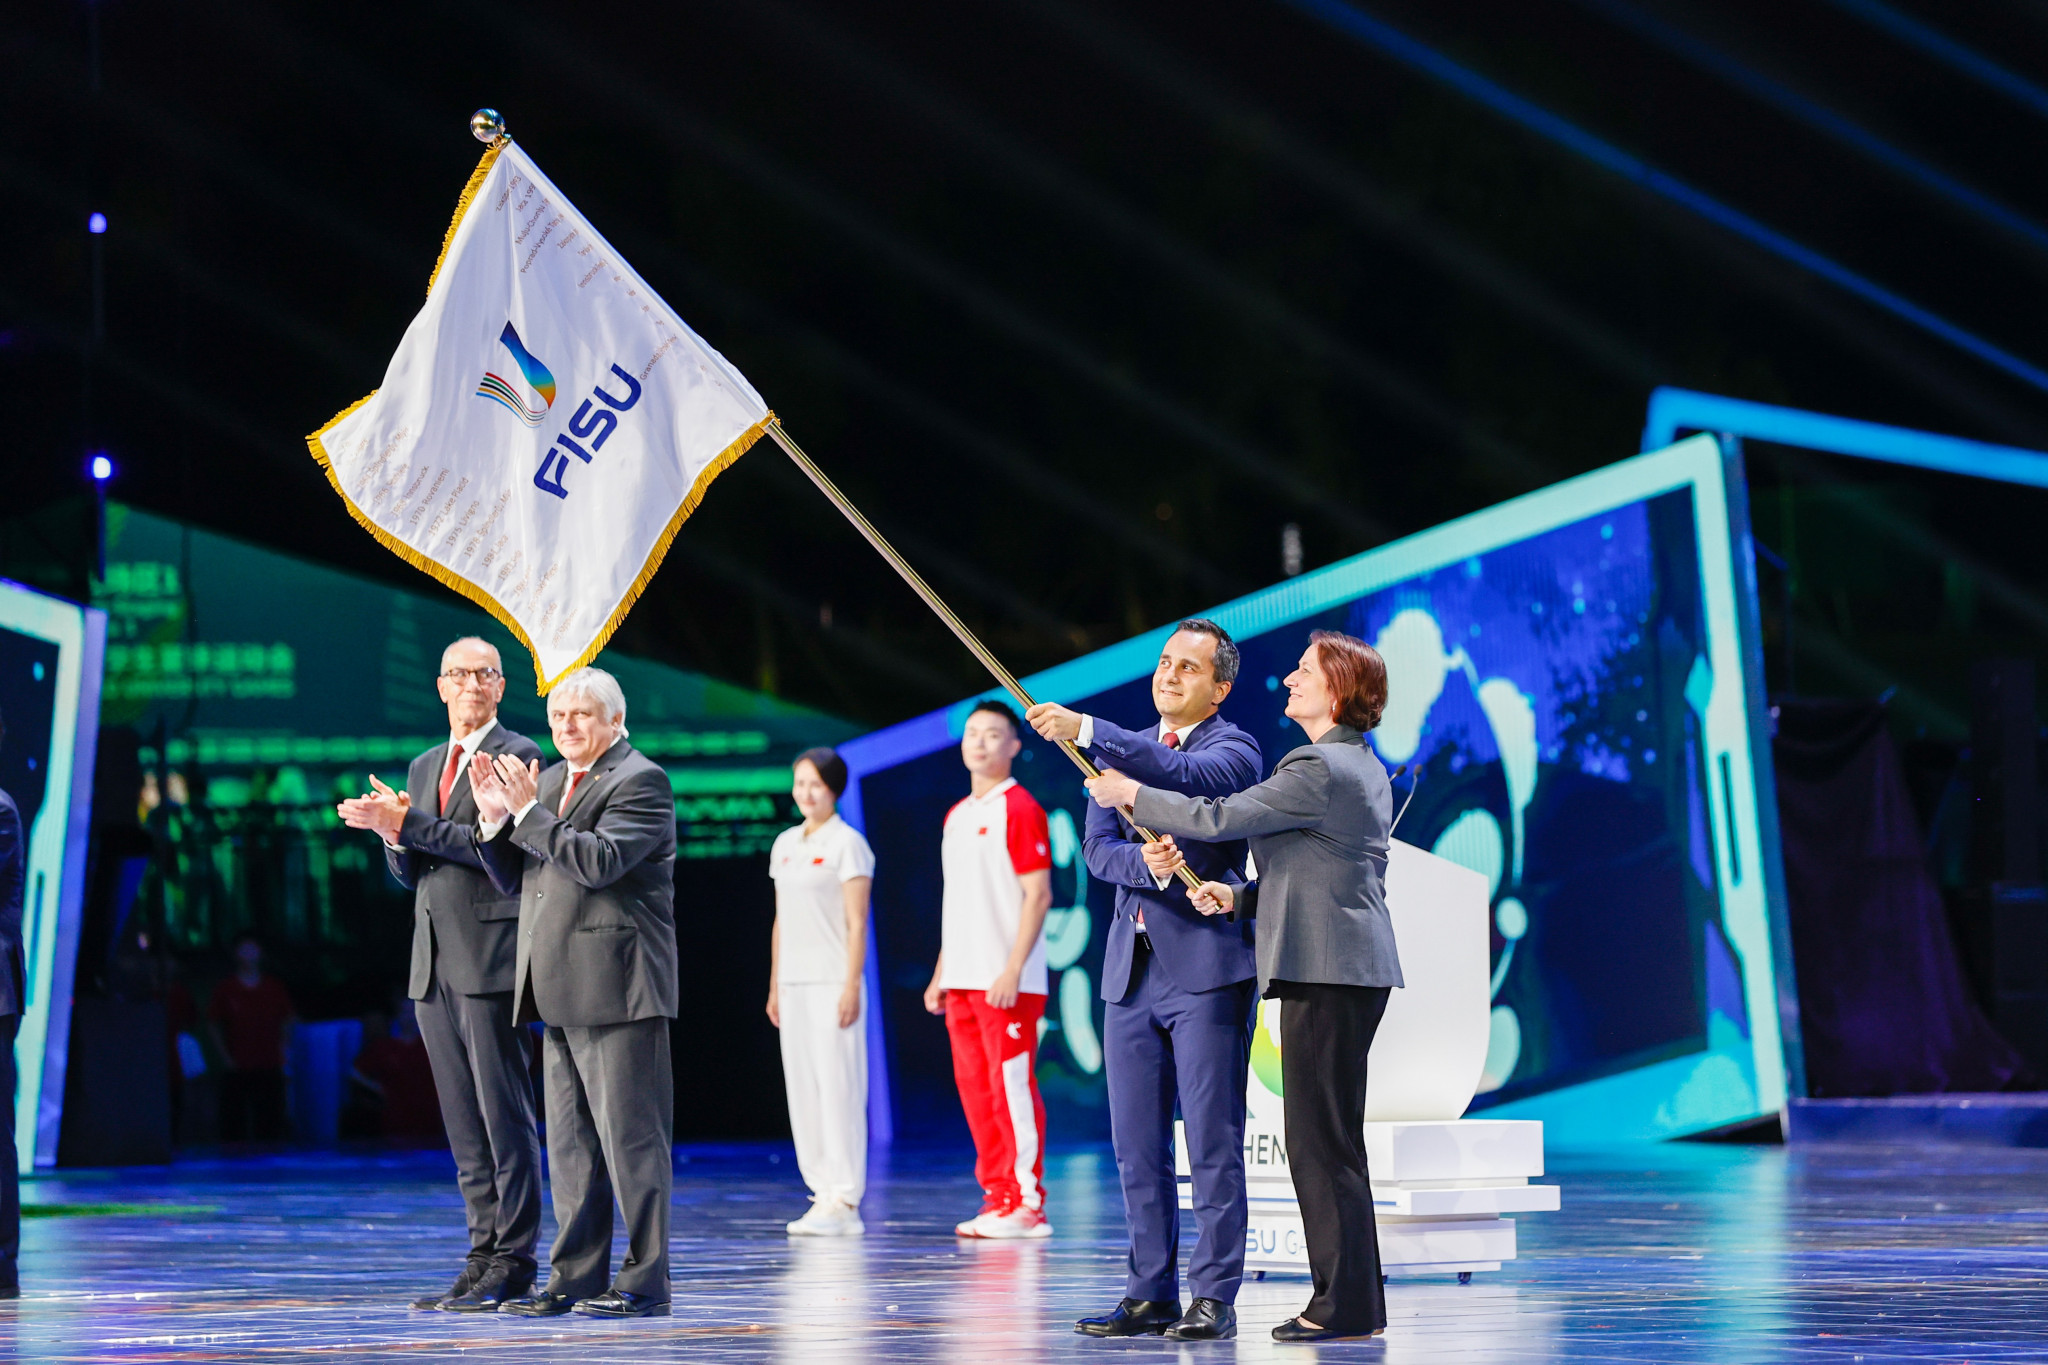 Rhine-Ruhr 2025 looking forward to hosting Summer World University Games after flag handover